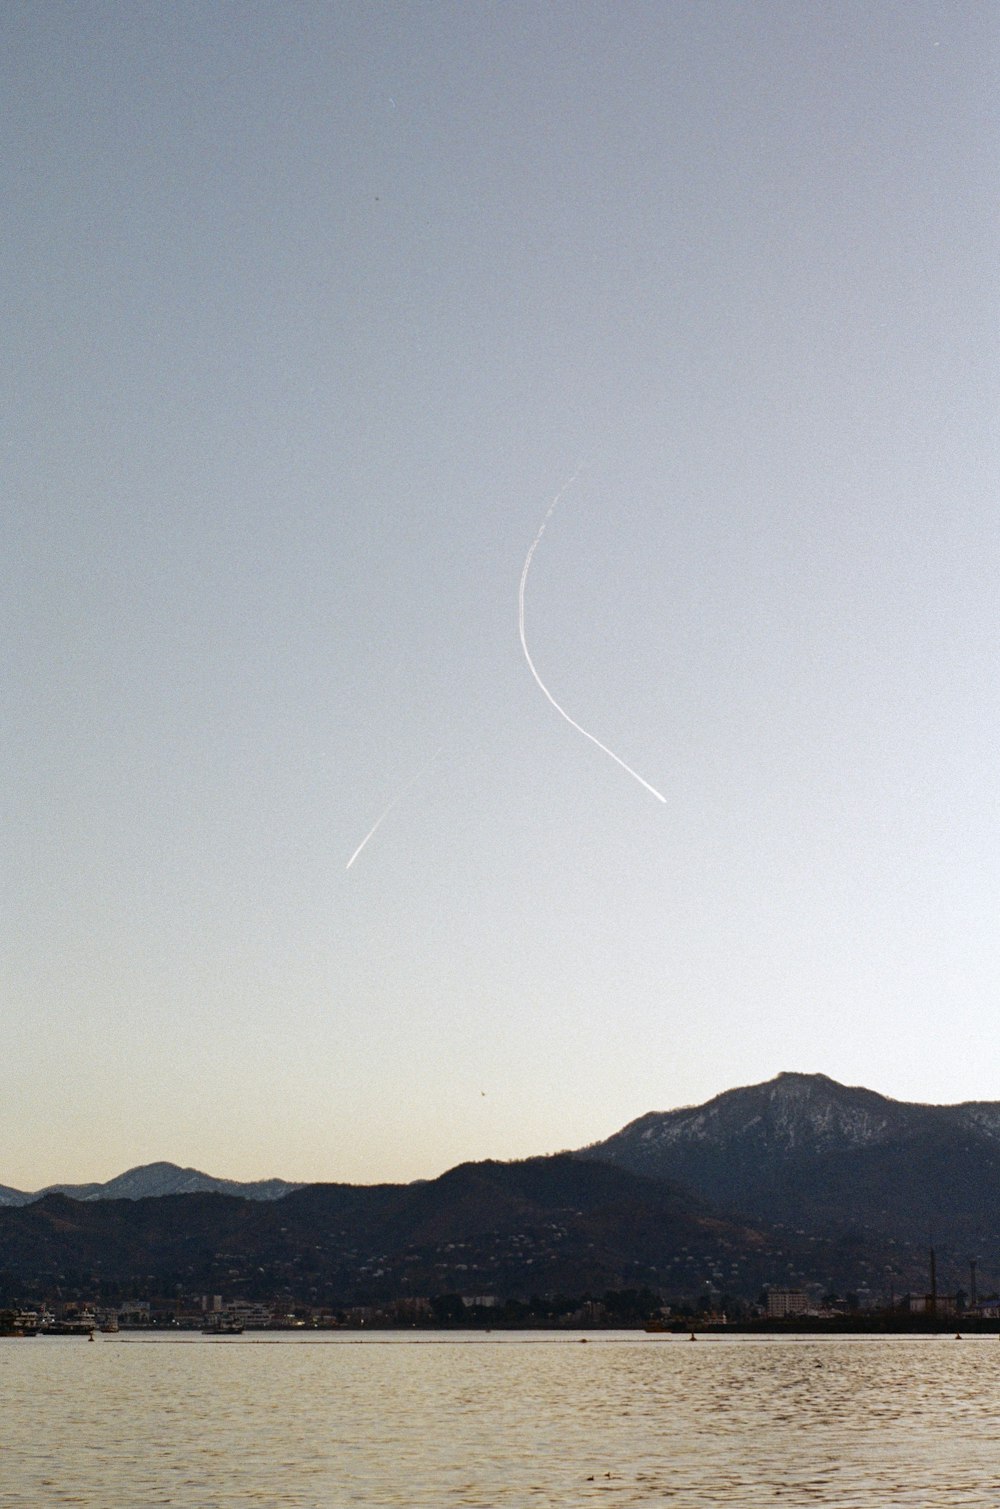 a plane flying over a body of water with mountains in the background